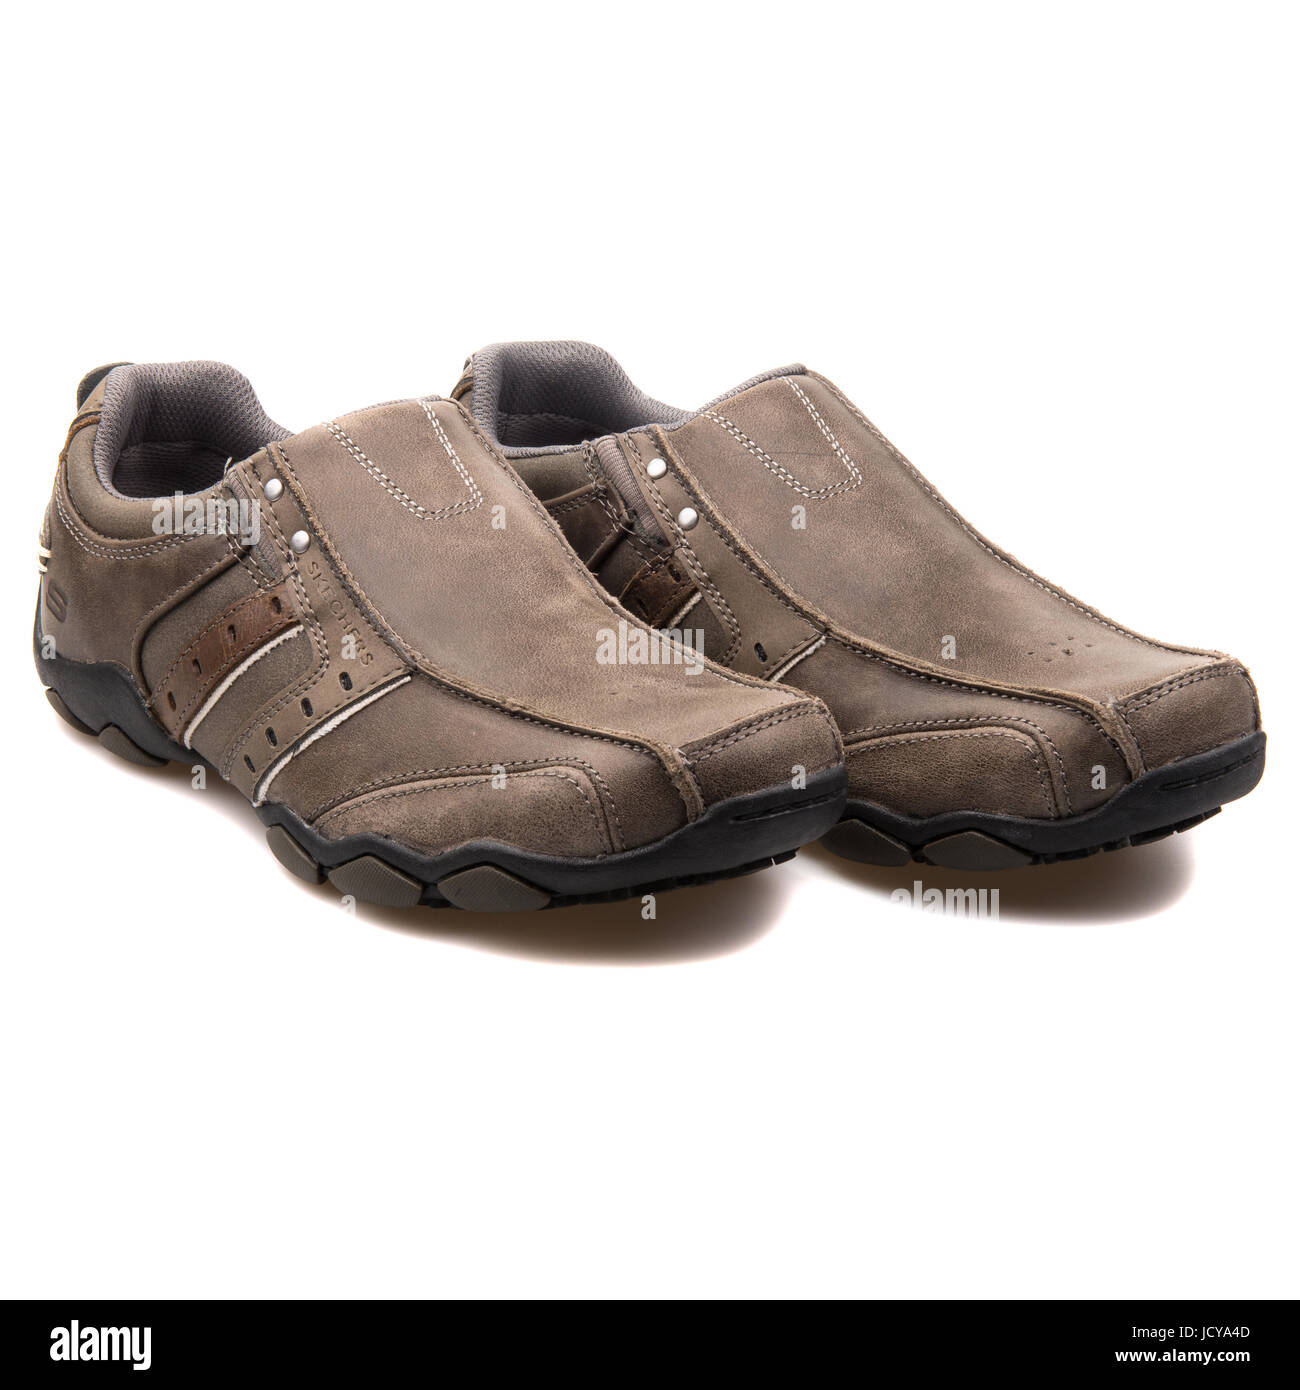 Skechers Diameter Charcoal Men's Leather Sports Shoes - 61779-CHAR Stock  Photo - Alamy